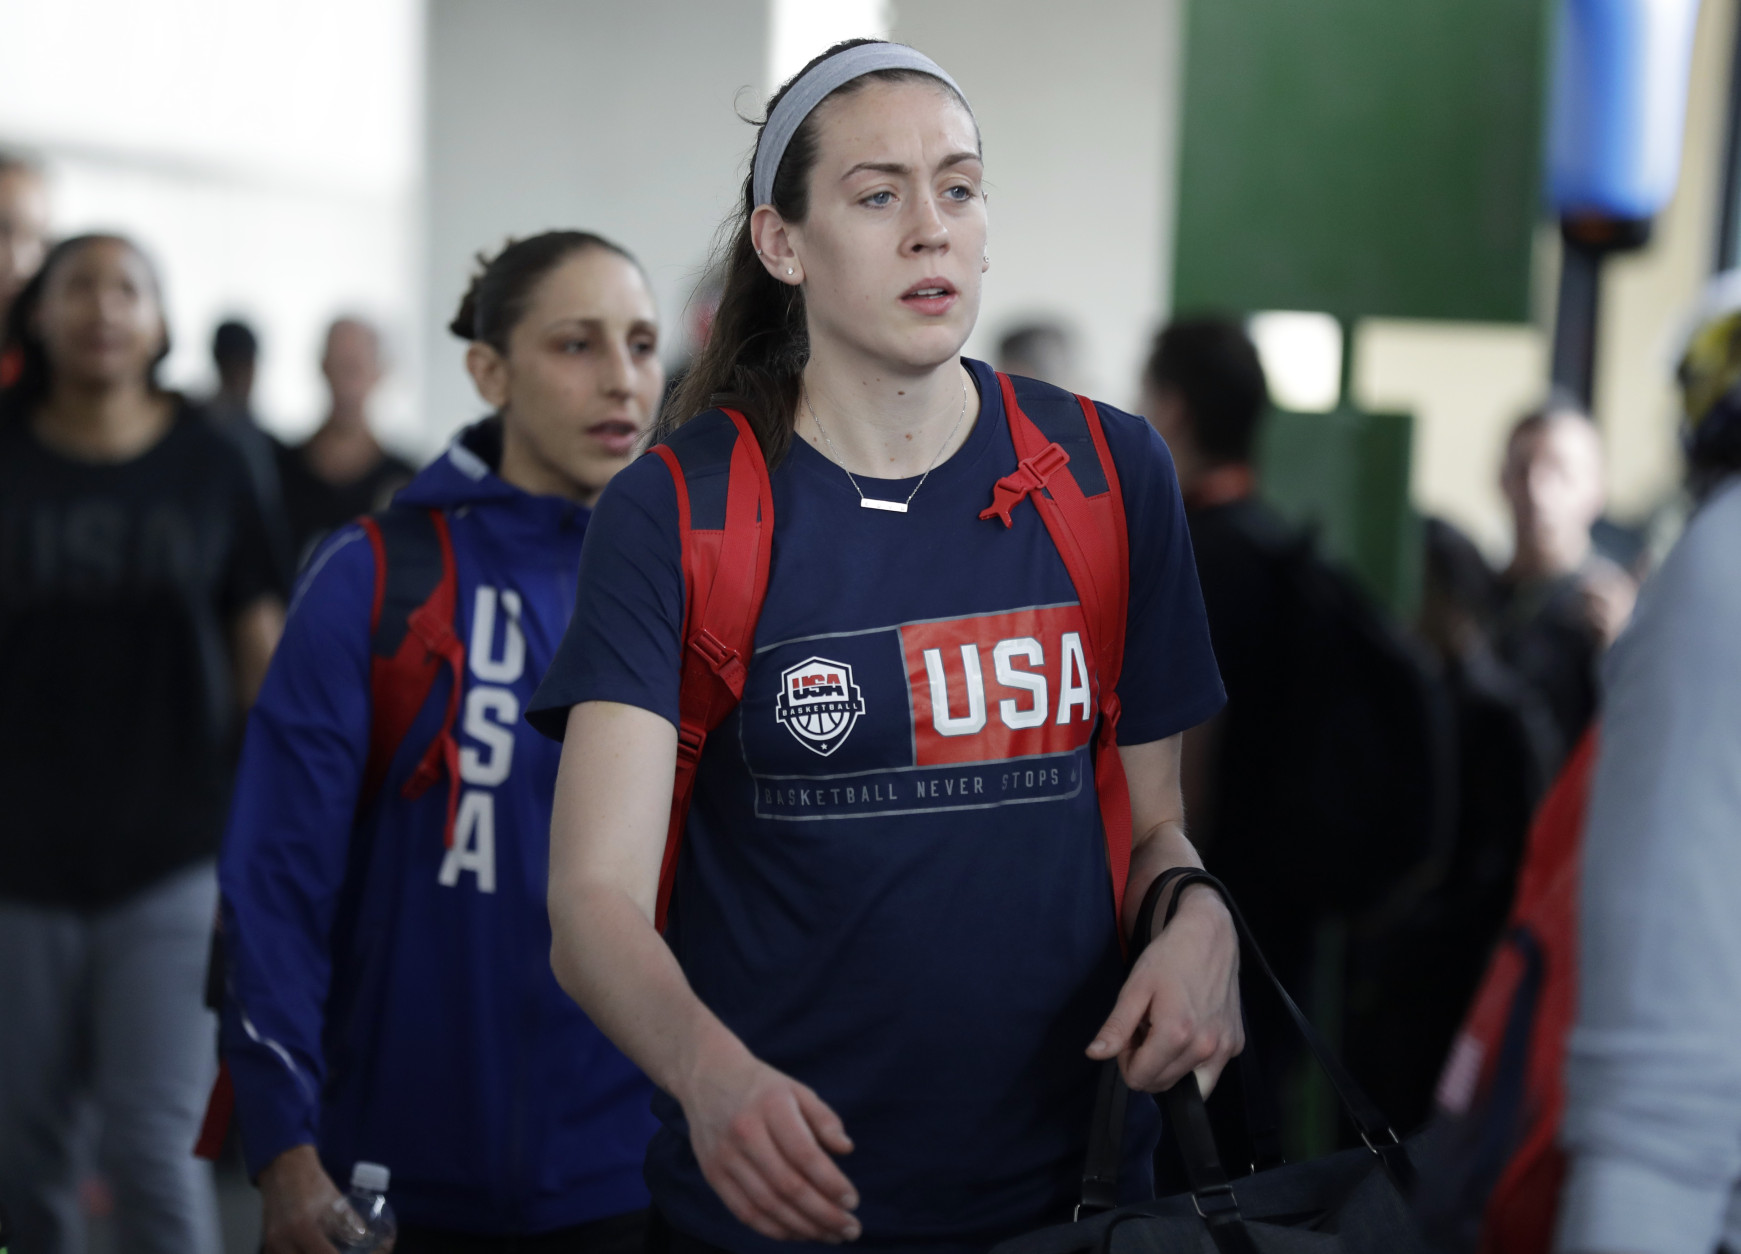 United States women's basketball player Breanna Stewart boards a bus at the airport after arriving at the 2016 Summer Olympics in Rio de Janeiro, Brazil, Wednesday, Aug. 3, 2016. (AP Photo/Charlie Neibergall)